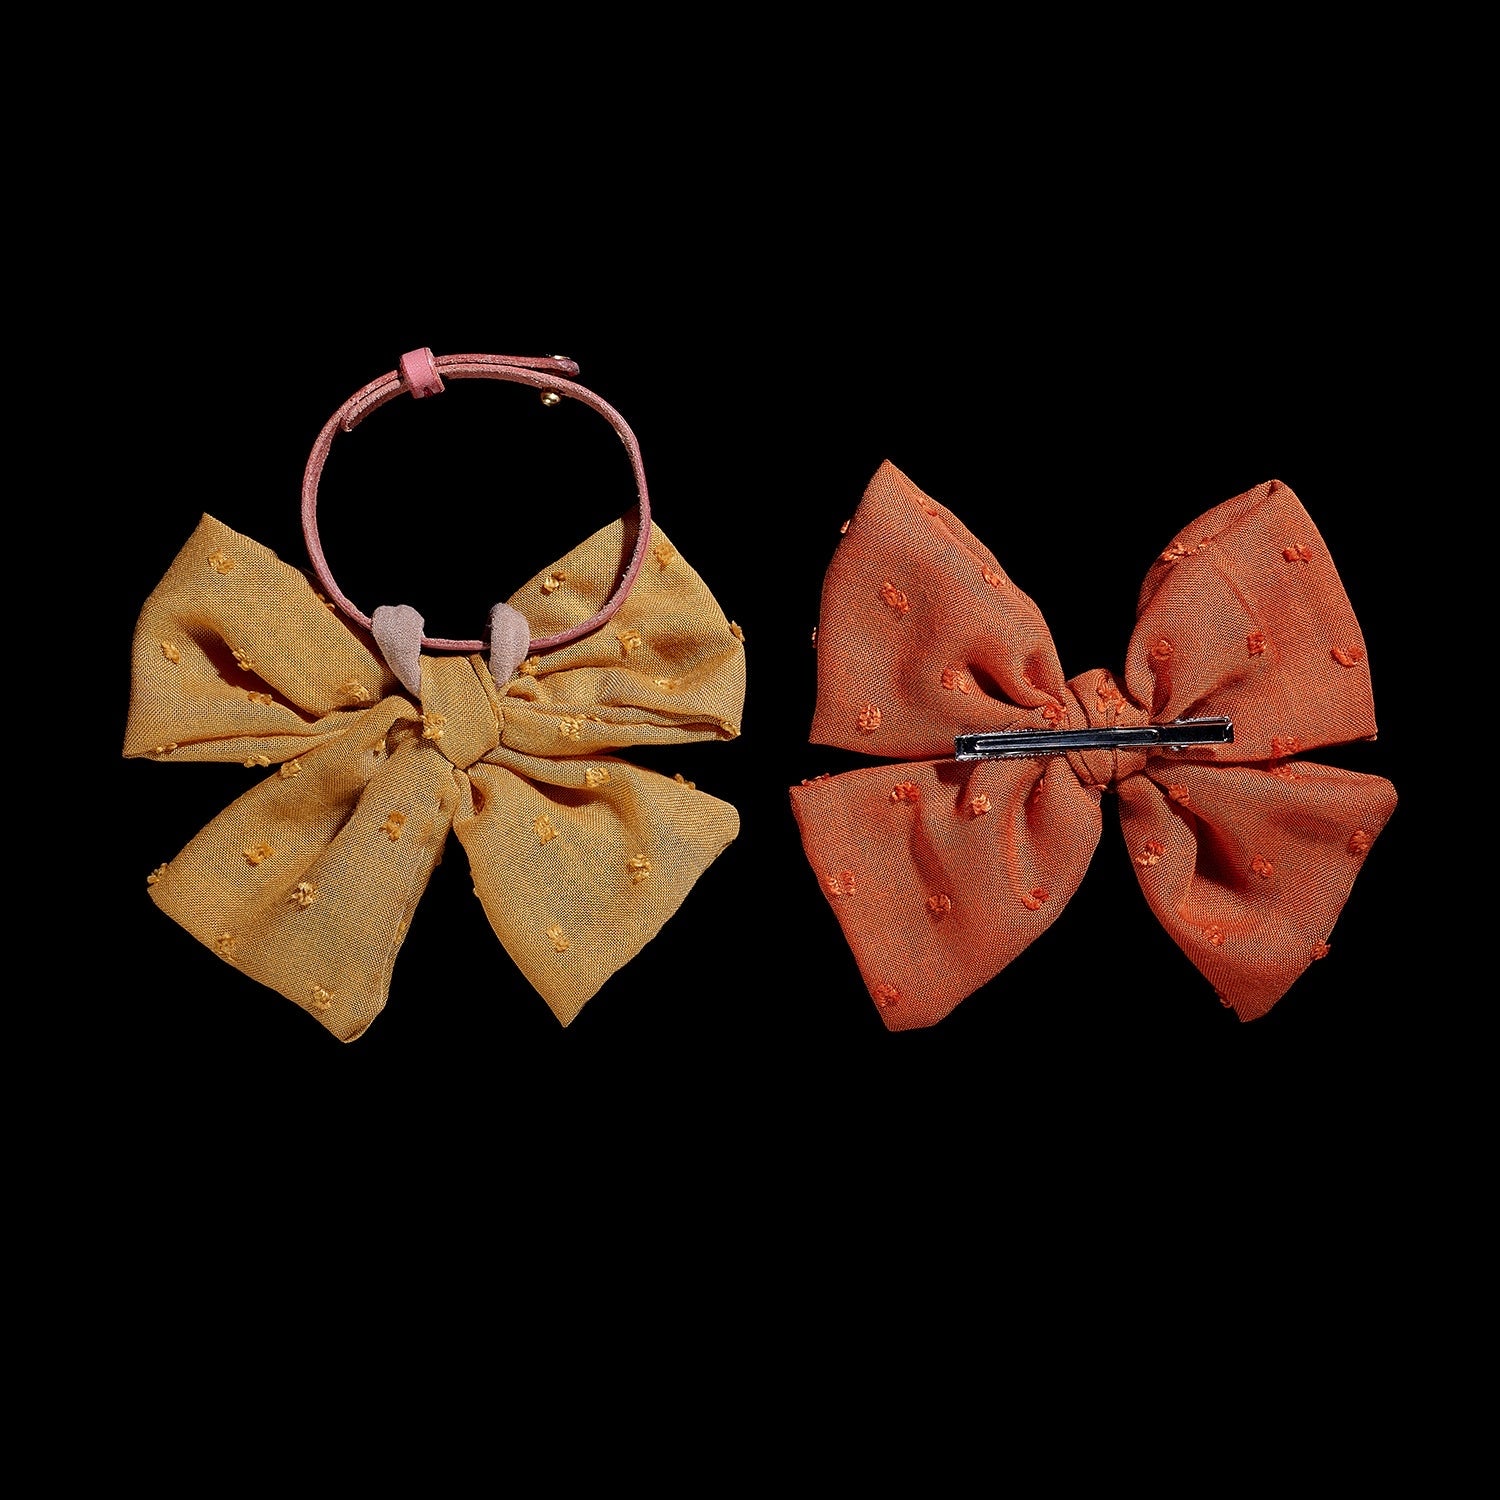 Knot Bow